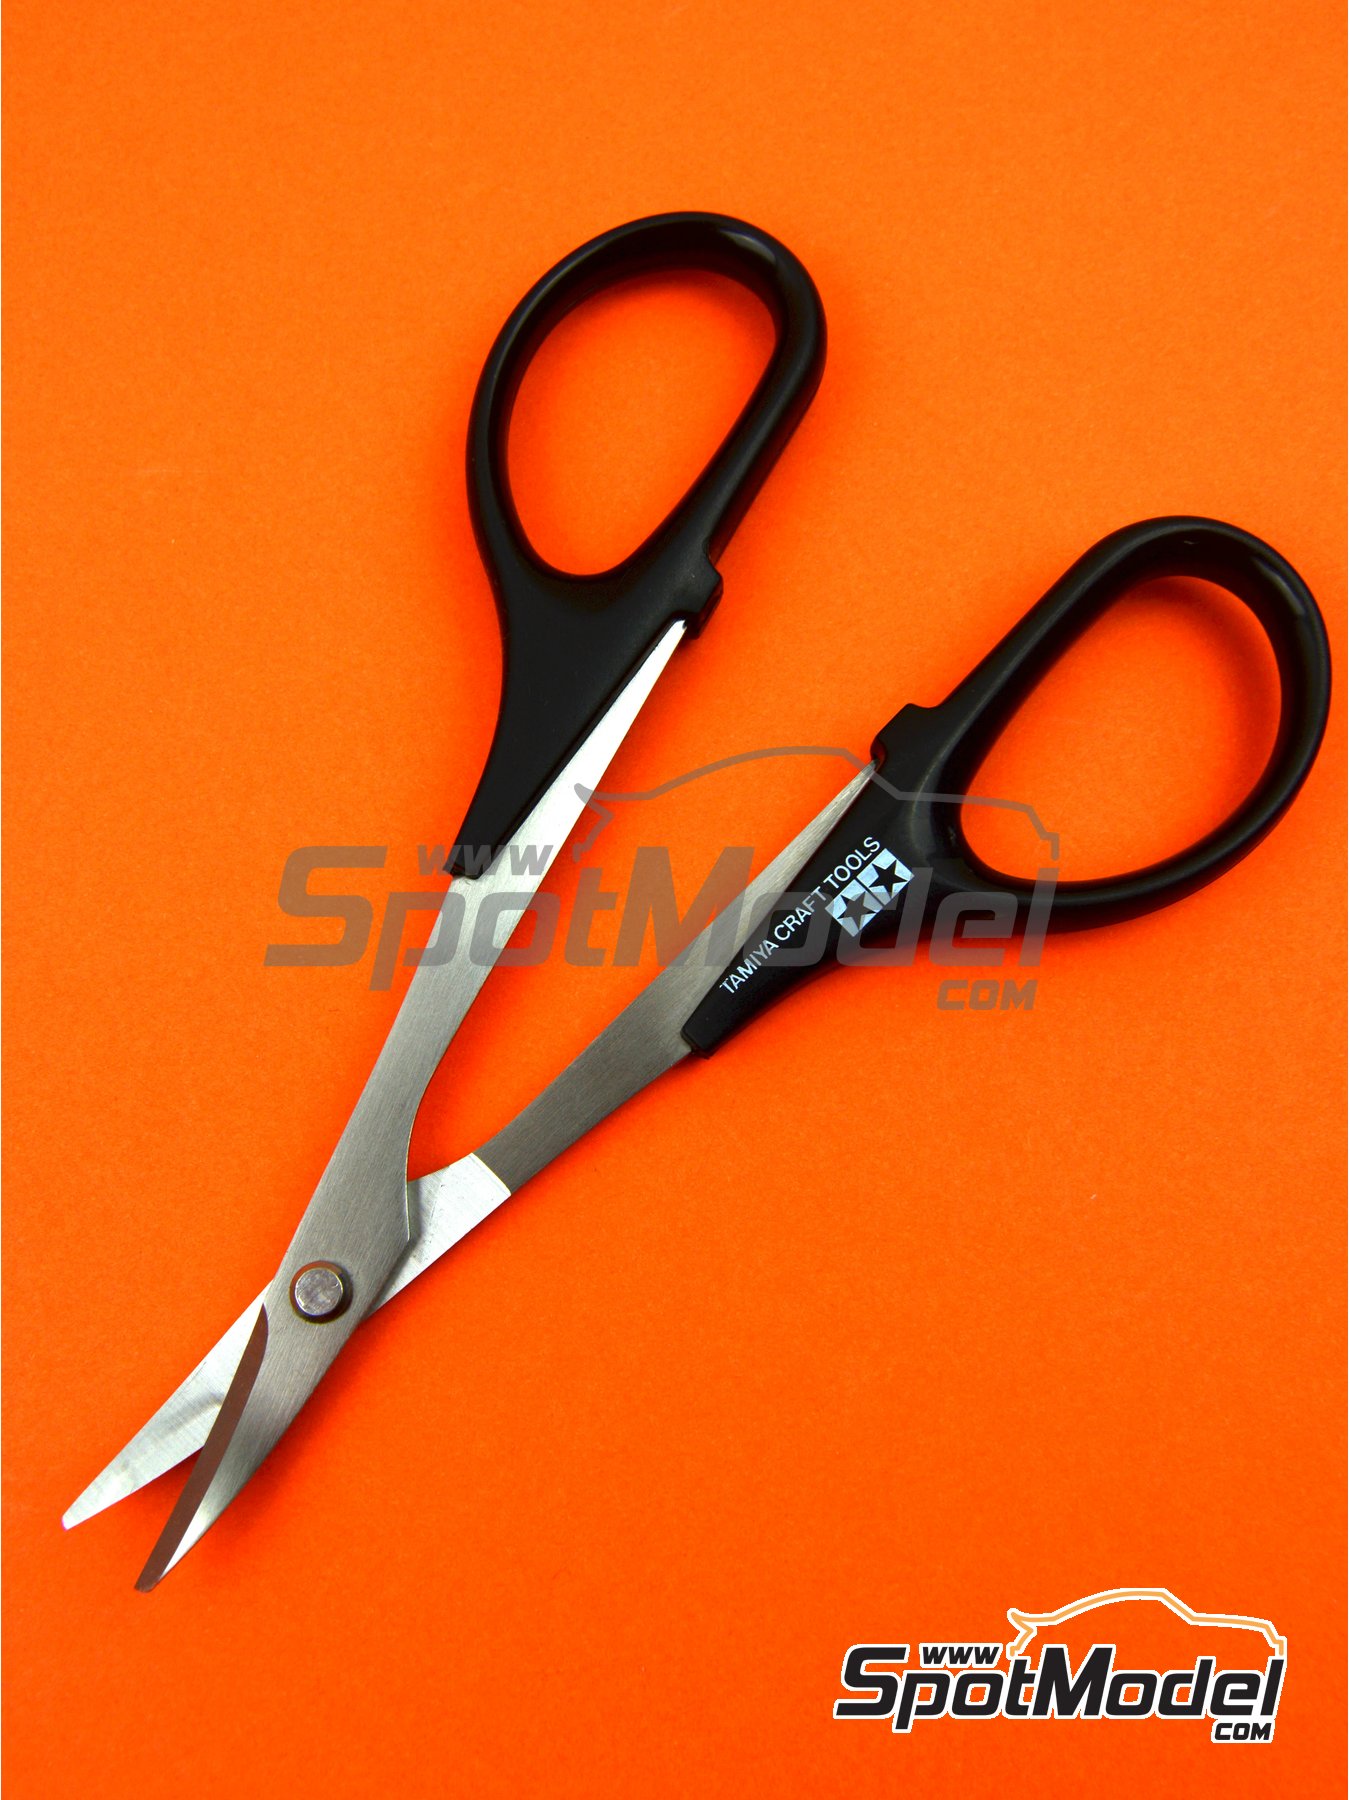 Decal Scissors for sale online Tamiya Tools 